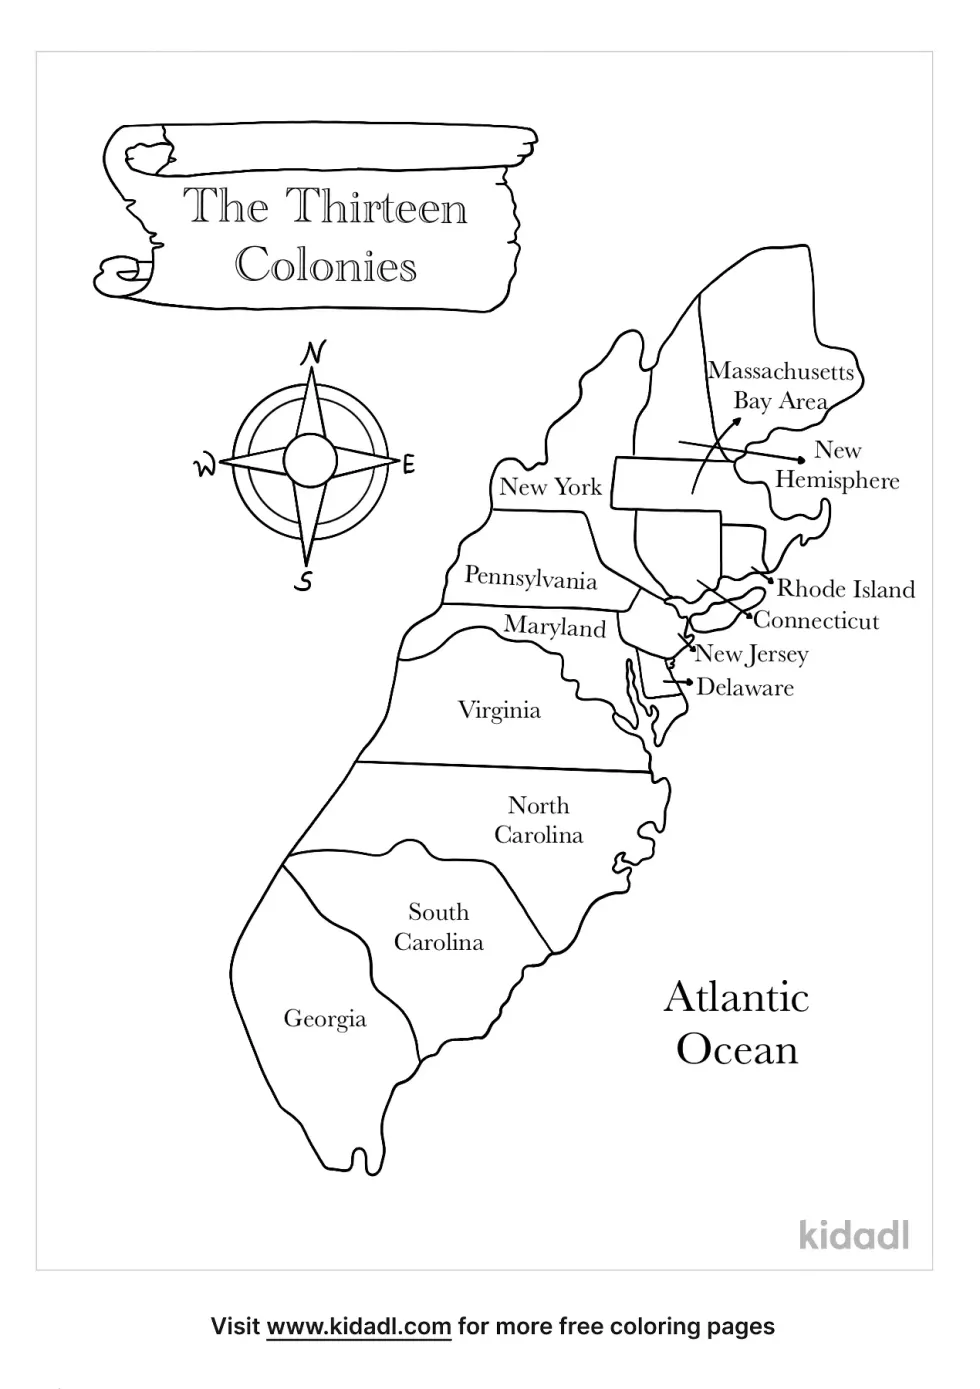 The 13 Colonies Coloring Page